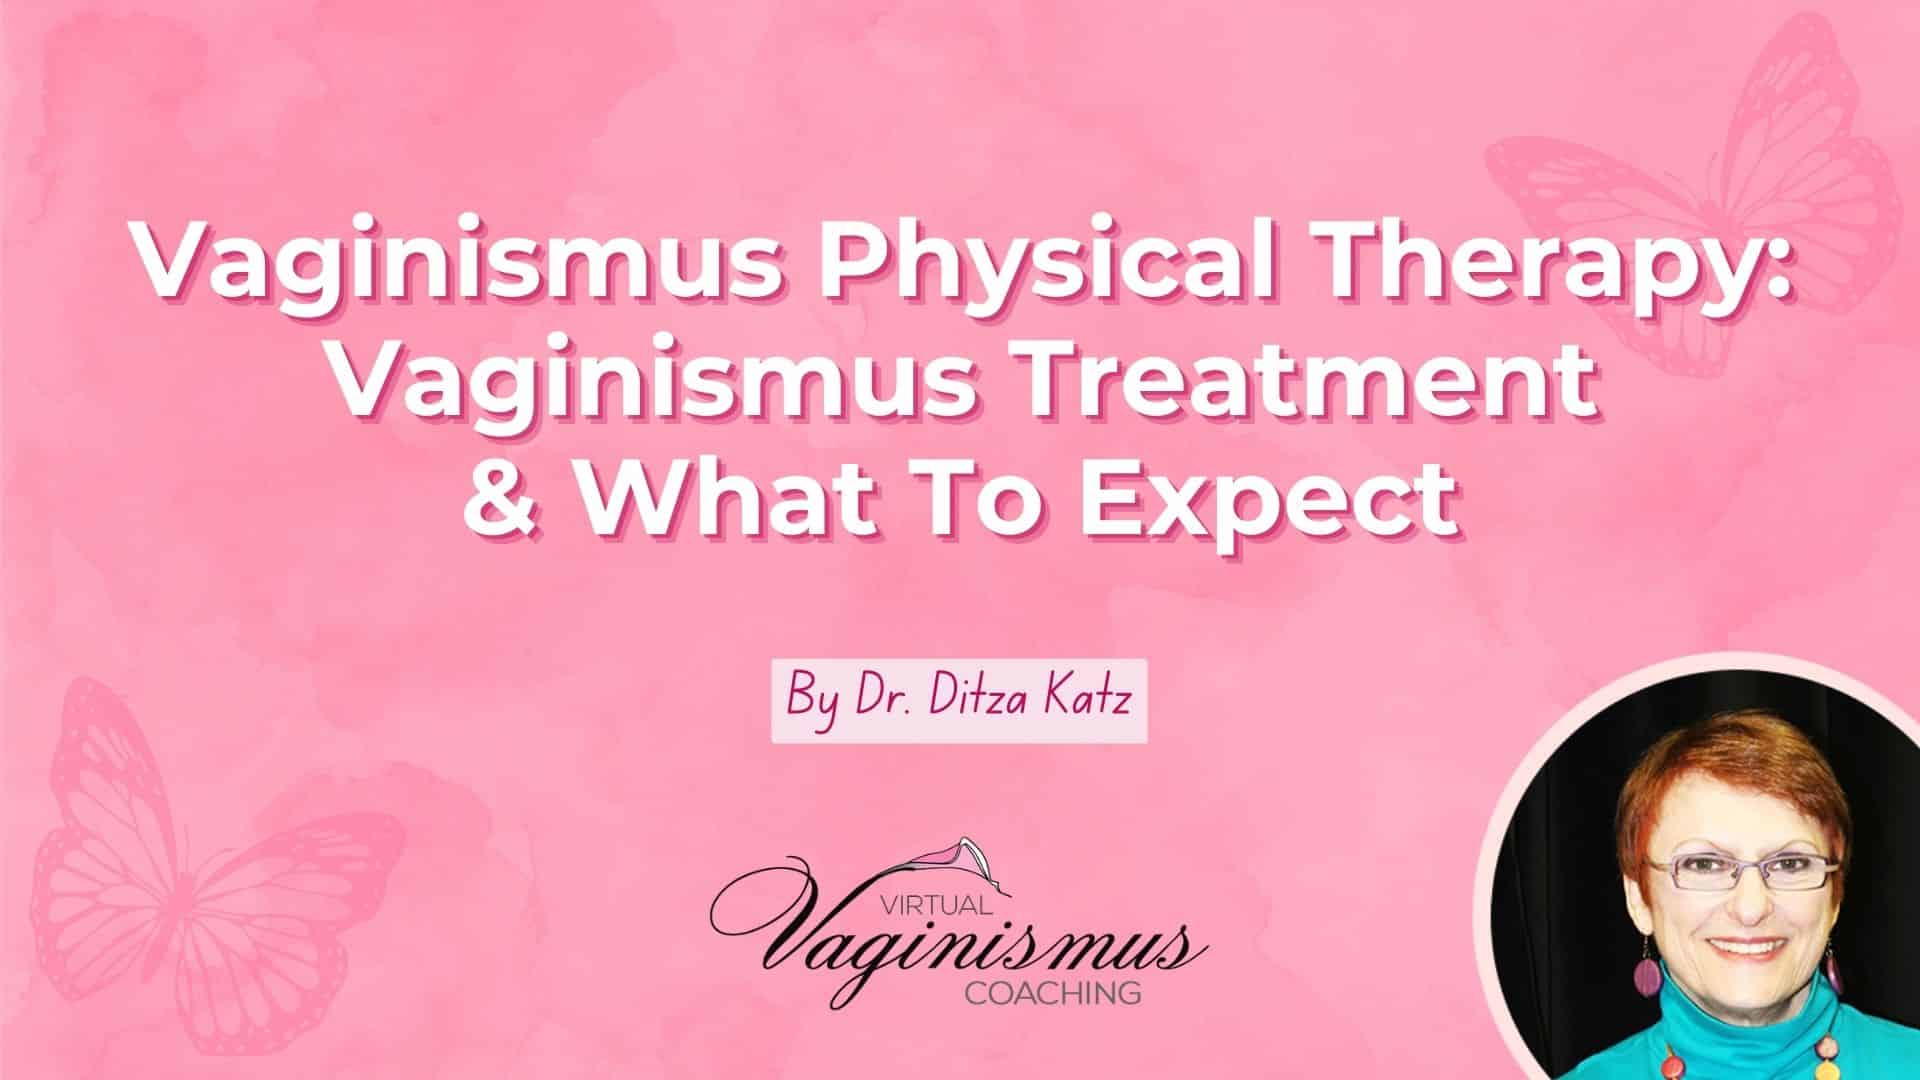 Vaginismus Physical Therapy